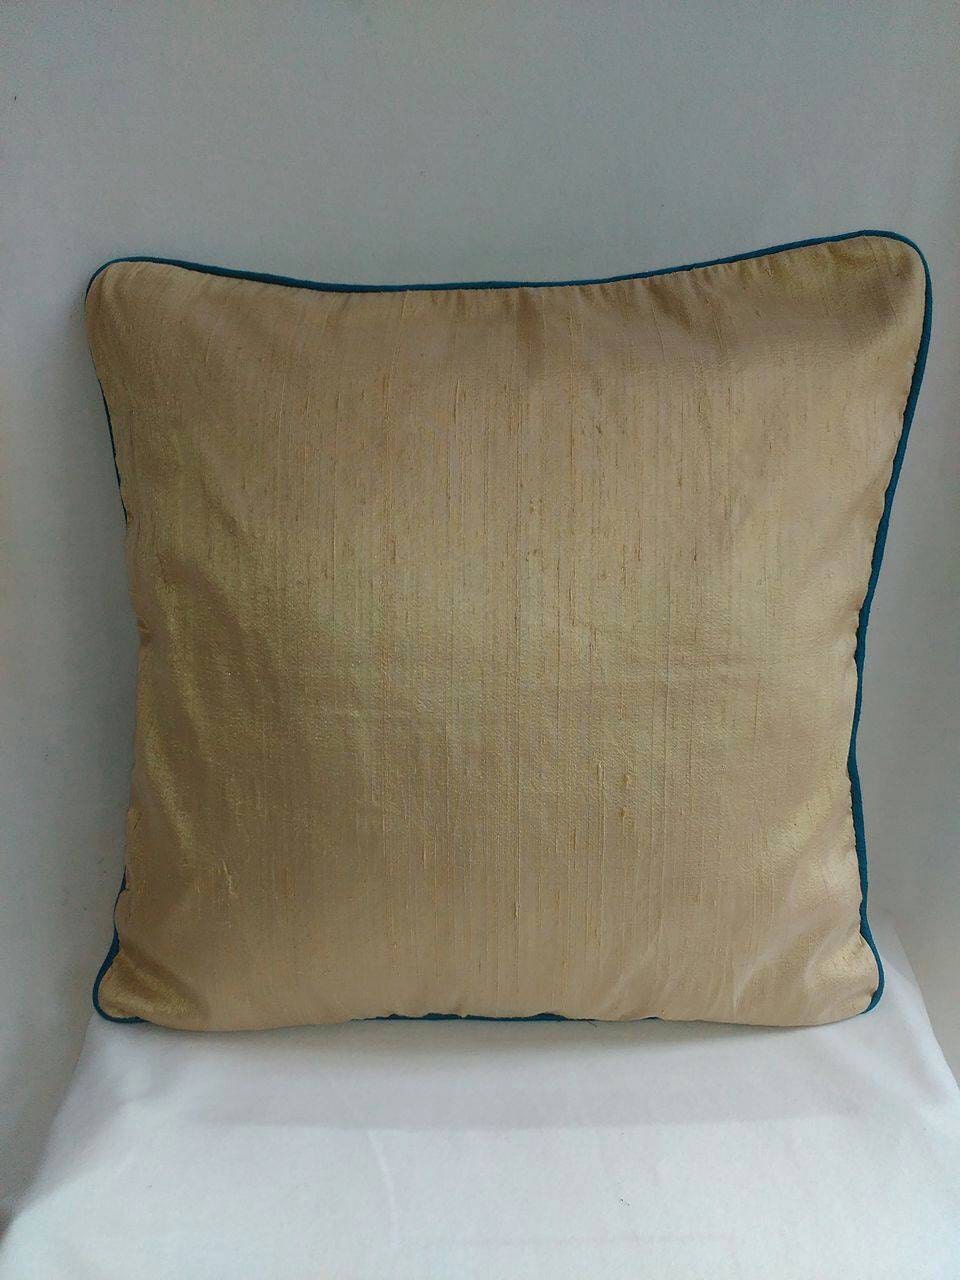 White Pillow Covers for Staffing, Cushion Inserts Covers. Custom Made With  Zipper Closure. Brought With Comfyheaven Pillows Cover Only. 